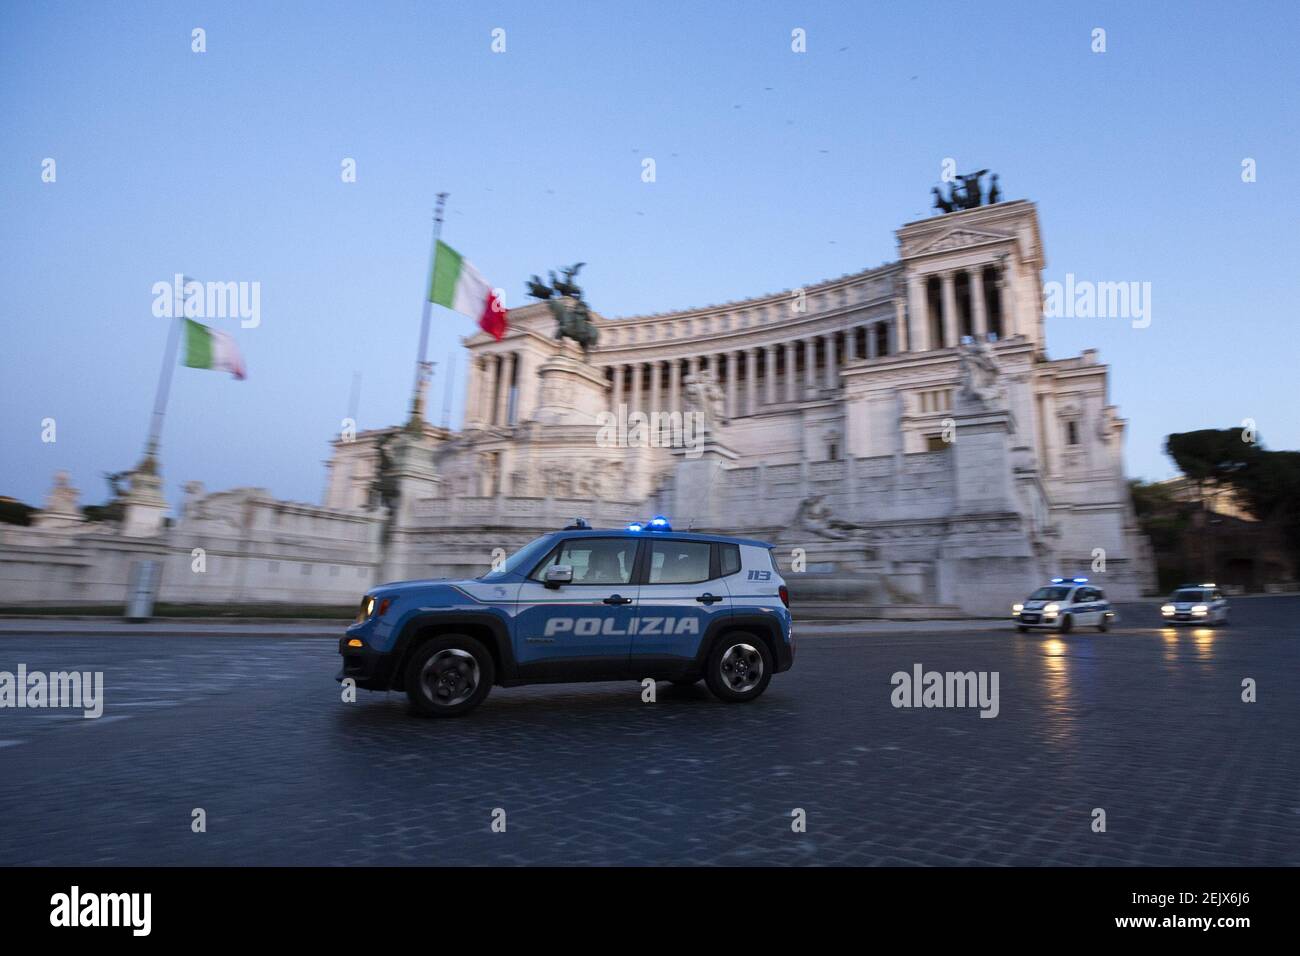 A police car pass in front of the Vittoriano in Piazza Venezia in Rome, Italy on March 23, 2020, during the 14th day of lockdown imposed nationwide by the Italian government that tries to tackle the coronavirus outbreak. Every movements in the citiies are restricted, and streets usually filled with life and traffic are almost empty (Photo by Giuseppe Fama/Pacific Press/Sipa USA) Stock Photo